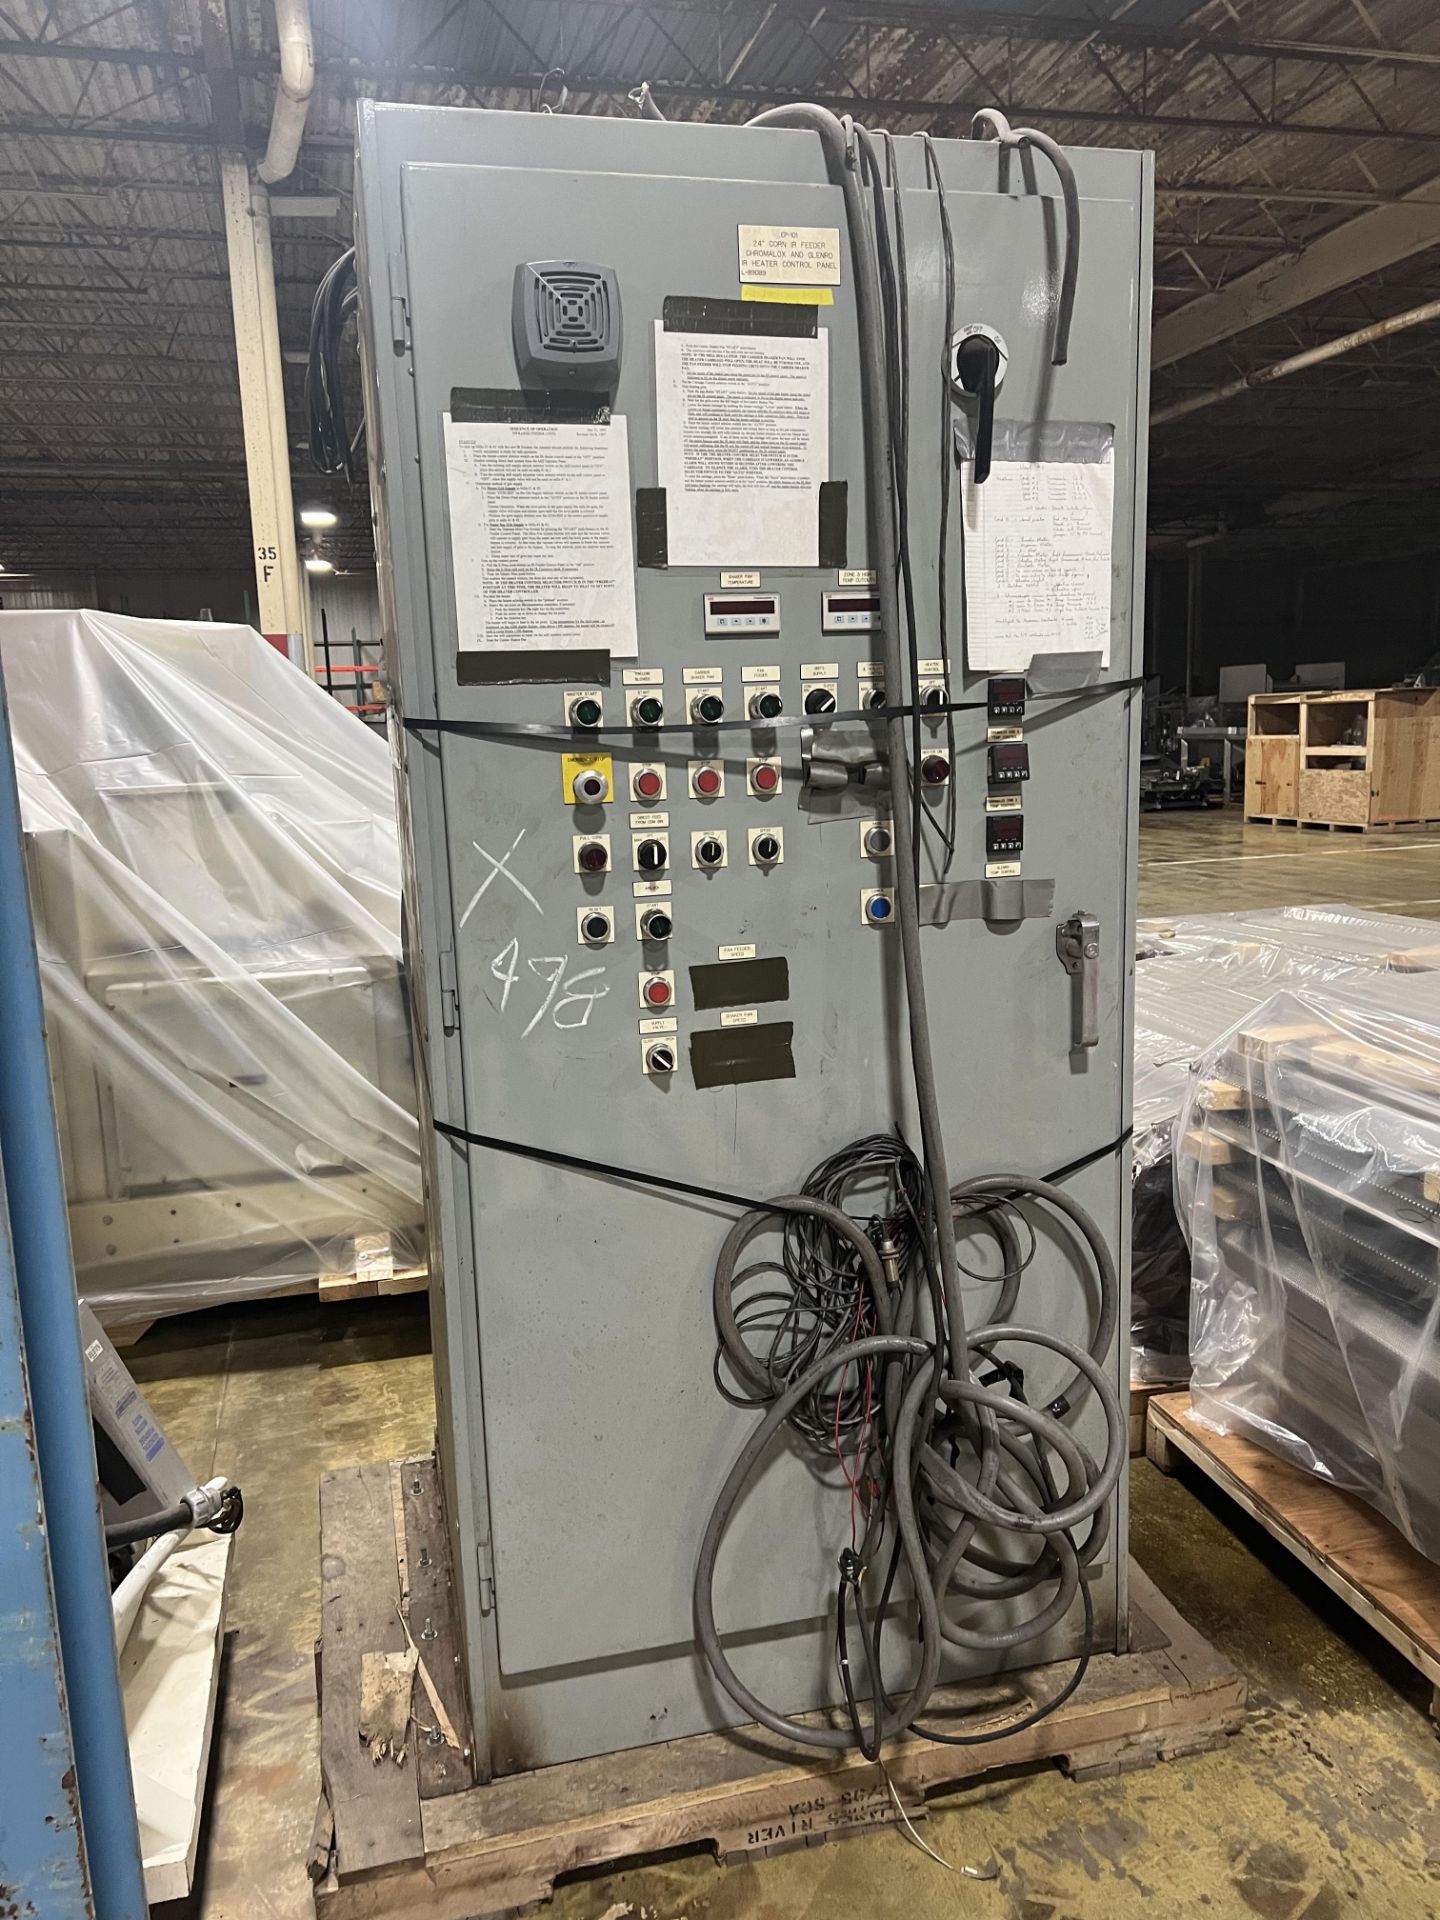 Carrier/Chromalox IR Feeders and Conveyor Units wirt Control Panel, Rigging/Loading Fee: $900 - Image 15 of 16